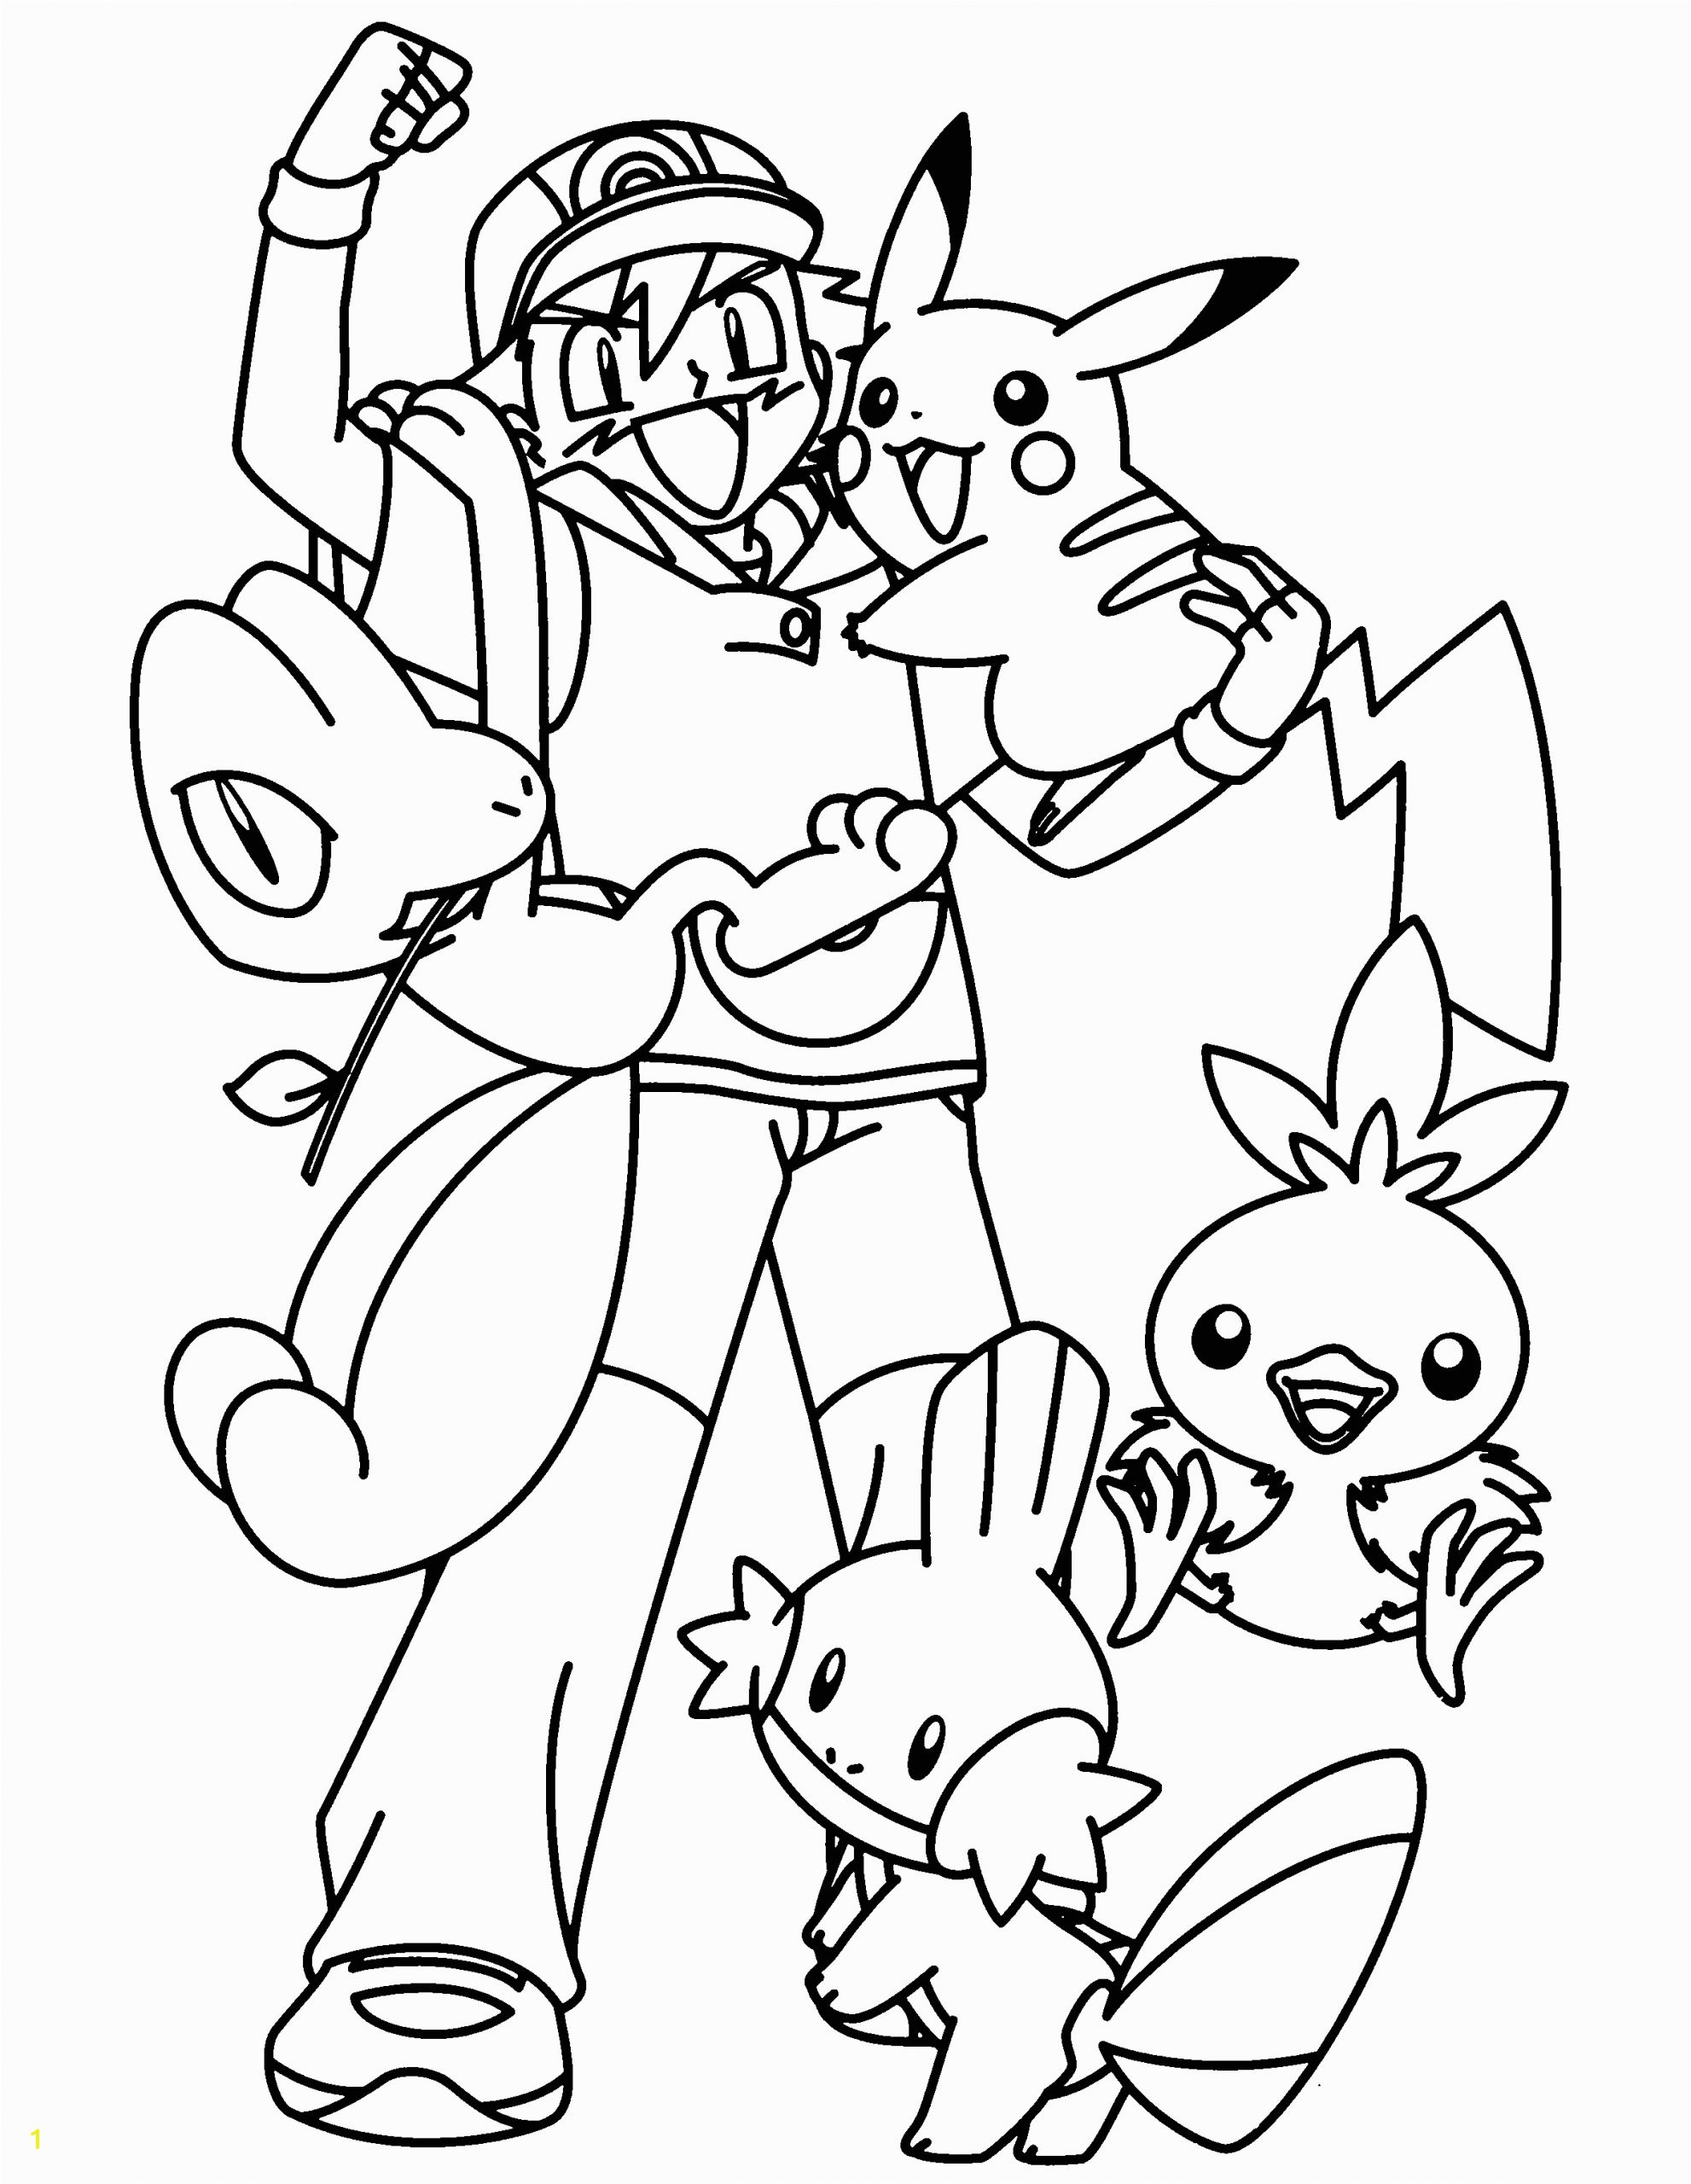 Pokemon Coloring Pages to Print for Free Pokemon Go Coloring Pages Best Coloring Pages for Kids